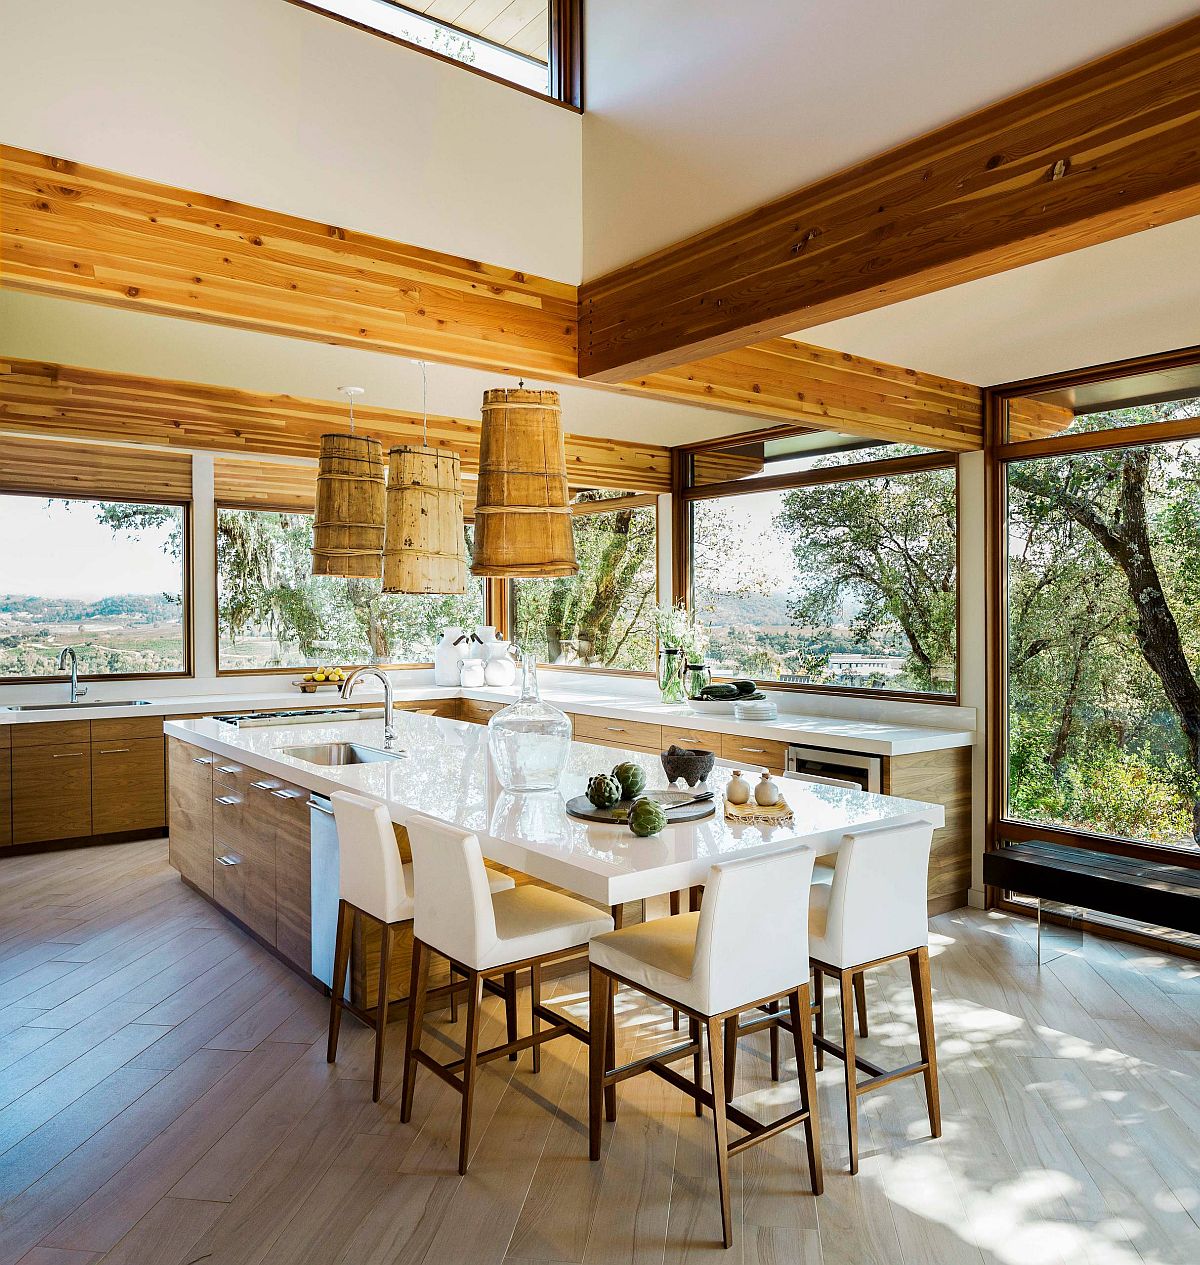 Spectacular-views-await-at-this-modern-organic-kitchen-in-San-Francisco-that-embraces-greenery-57139